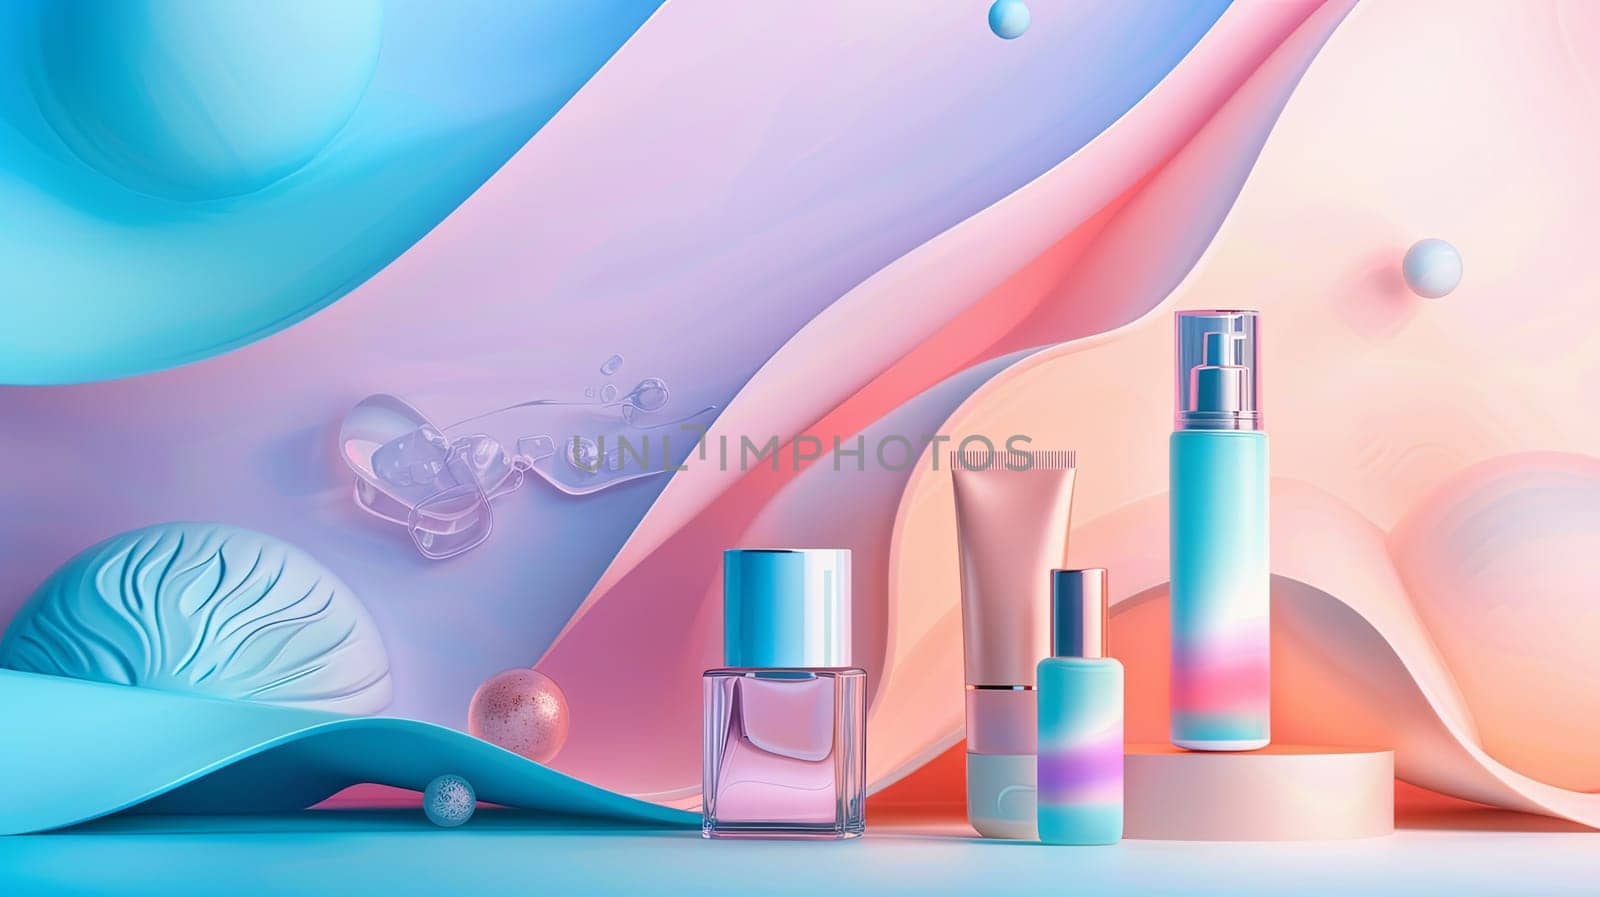 Different types of cosmetics products arranged on a vibrant and colorful background, suitable for beauty advertising and promotion.